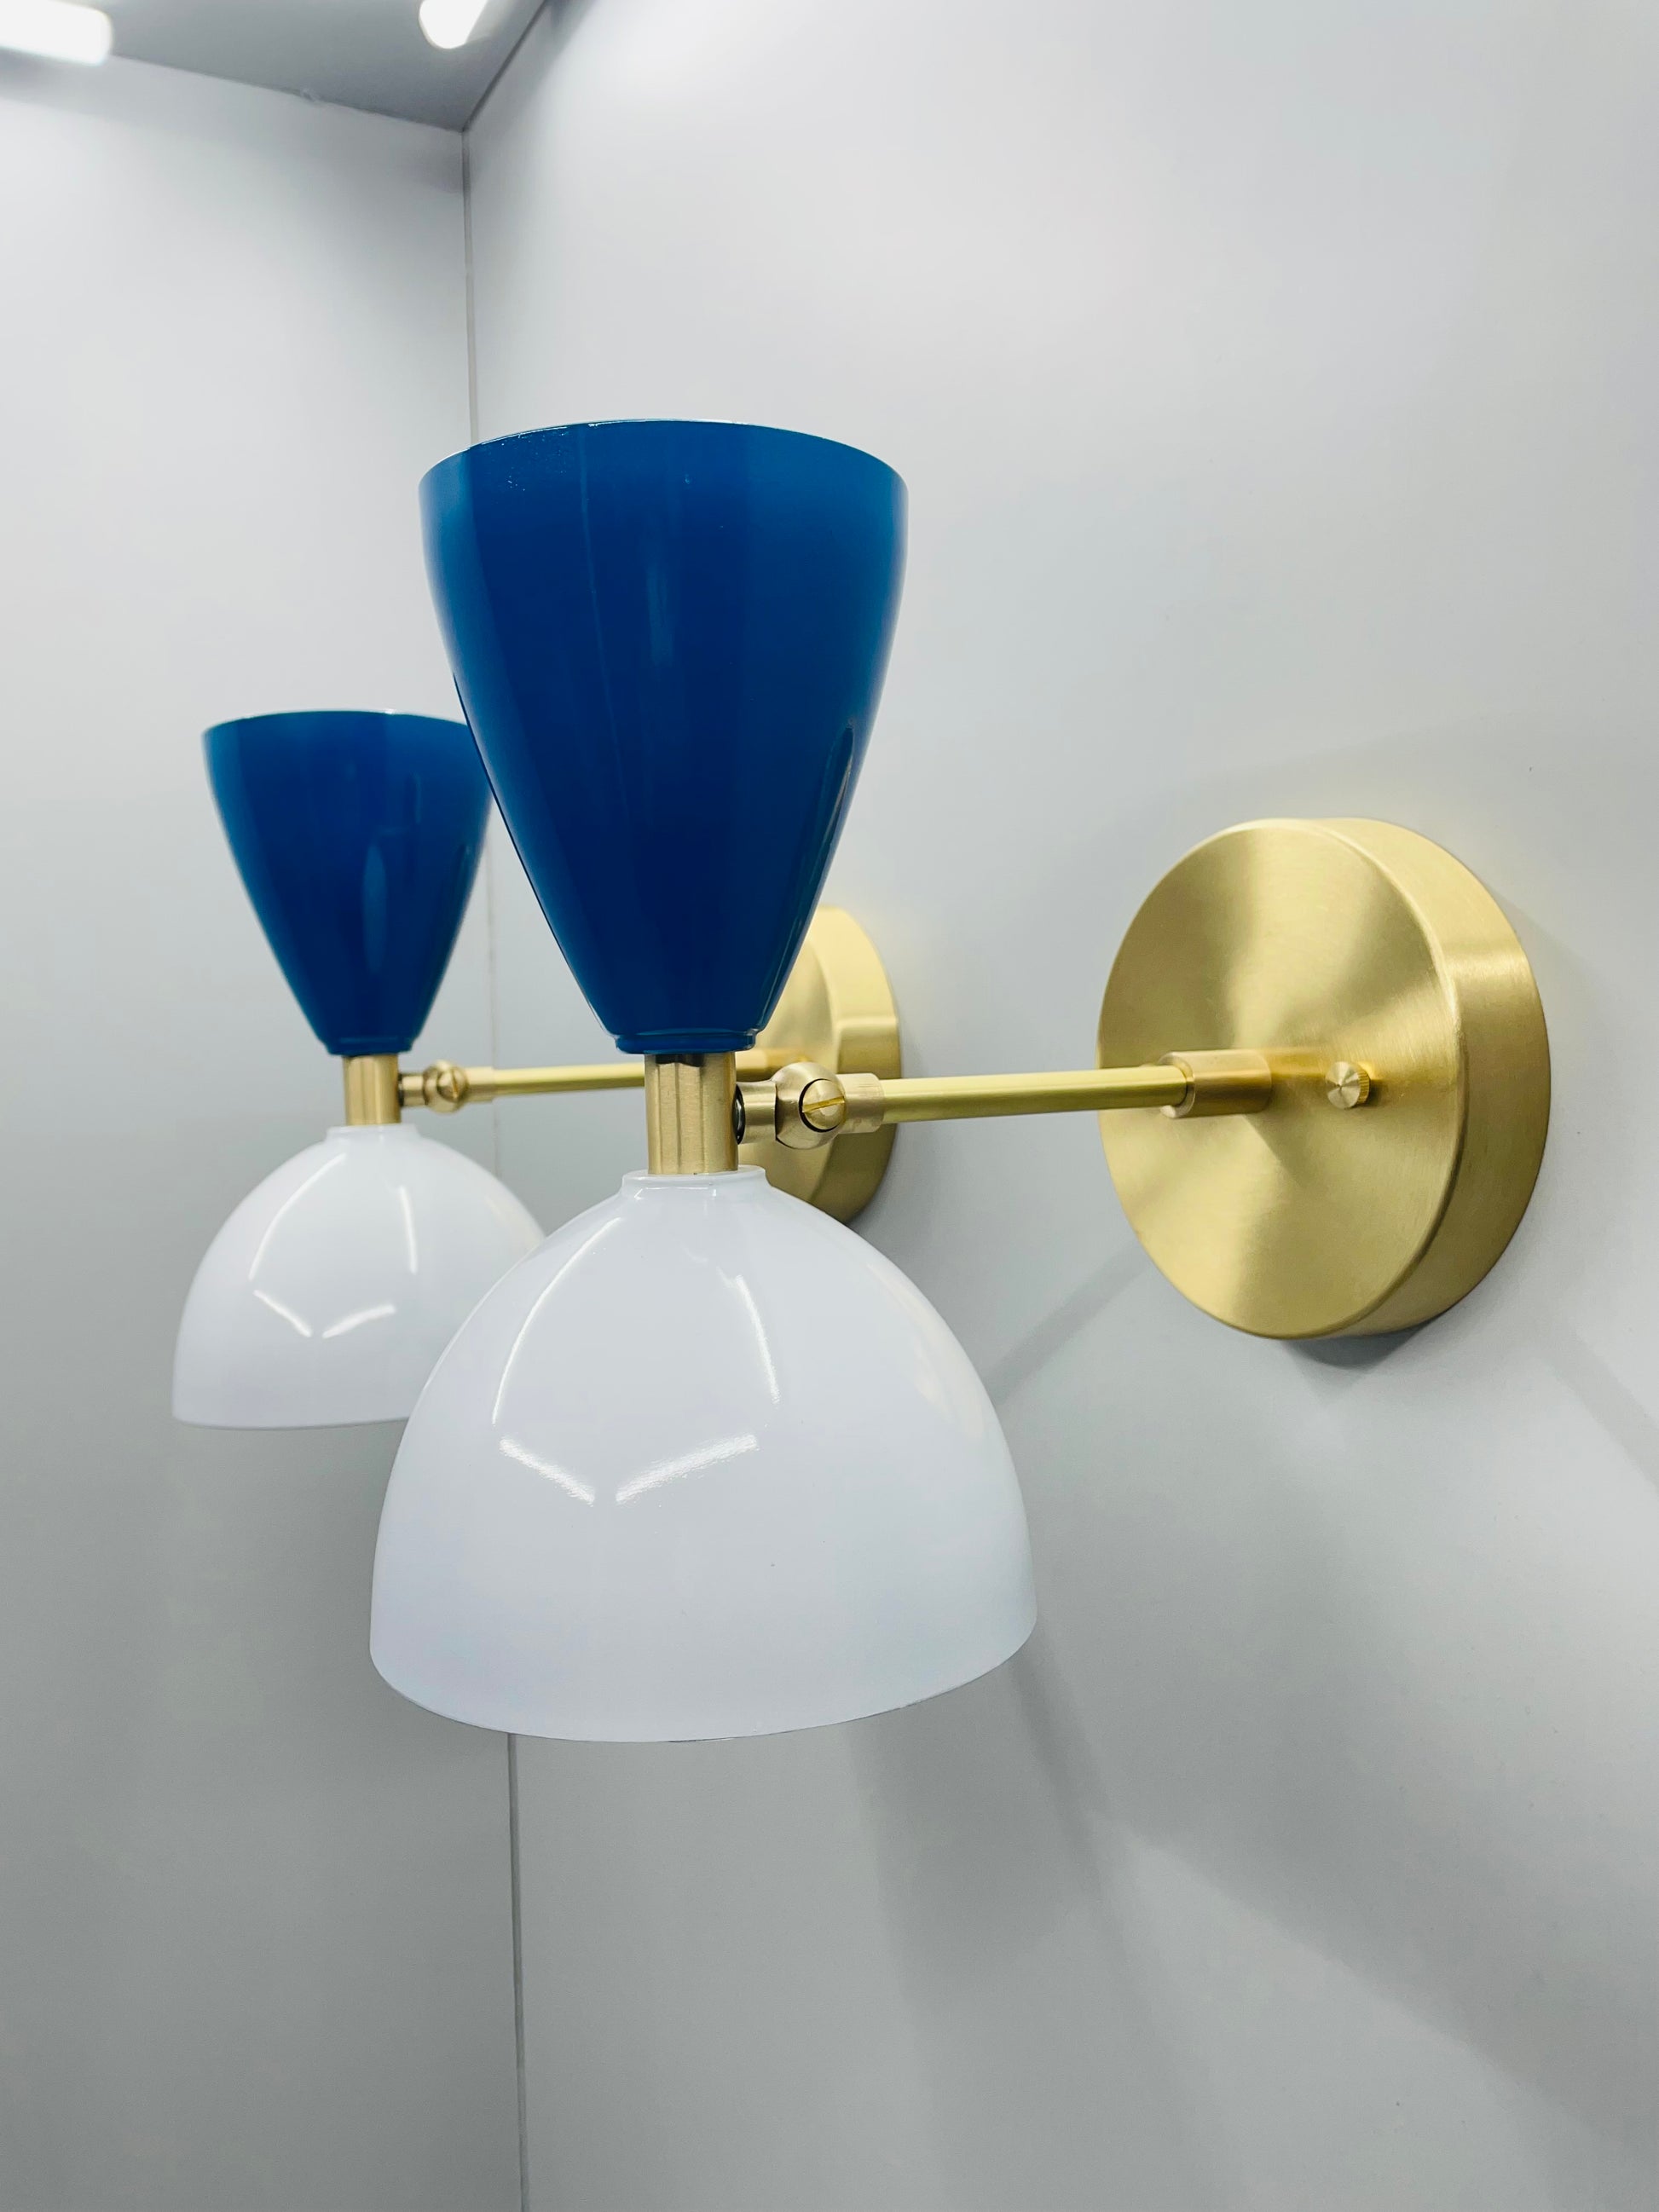 Illuminate Your Space with Italian Modern Wall Sconces